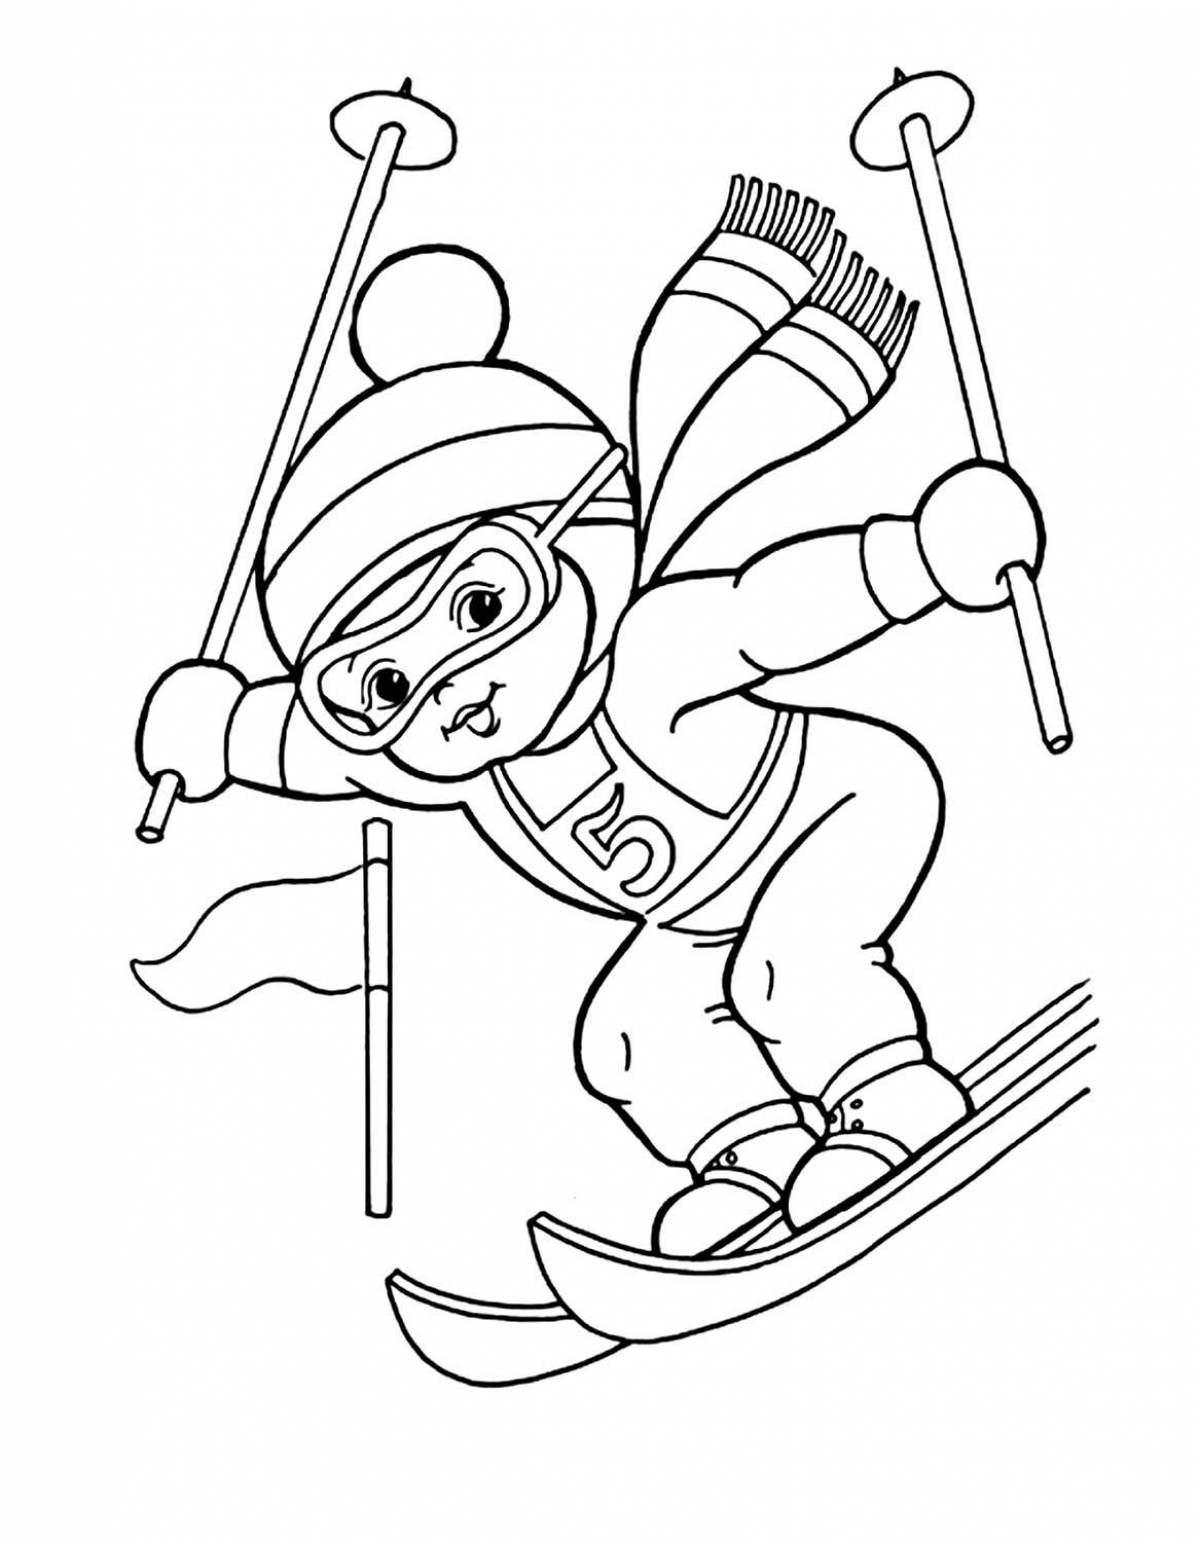 Live coloring for children 3-4 years old winter sports